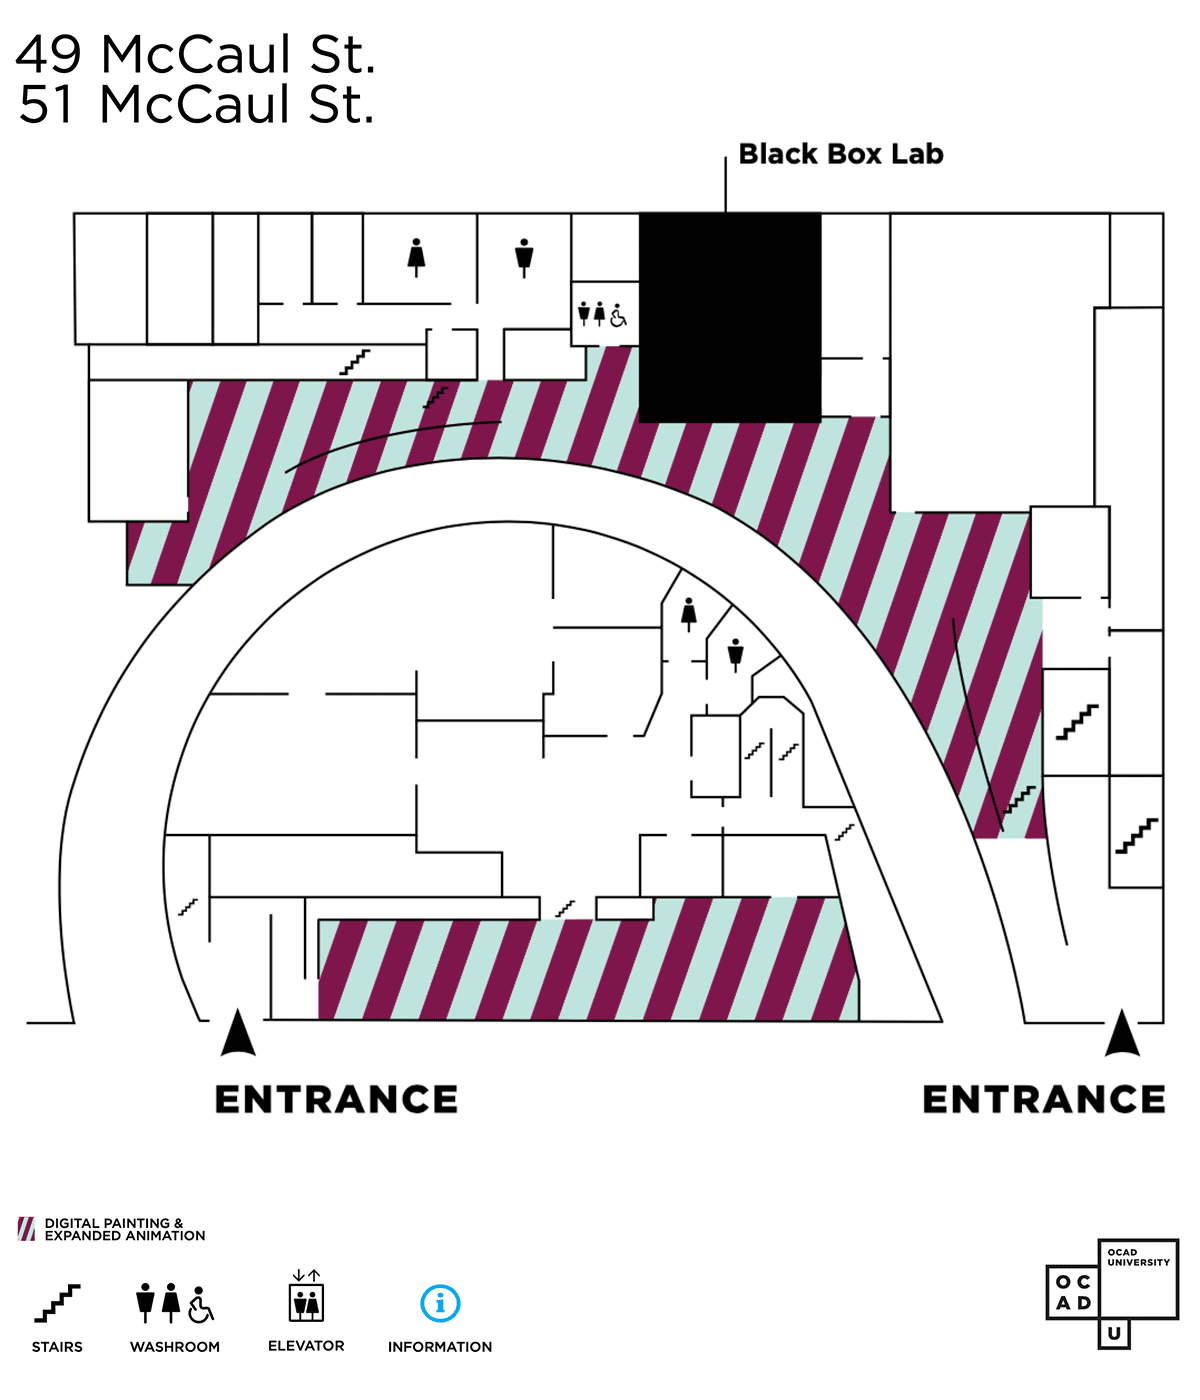 Map of 49 and 51 McCaul street.